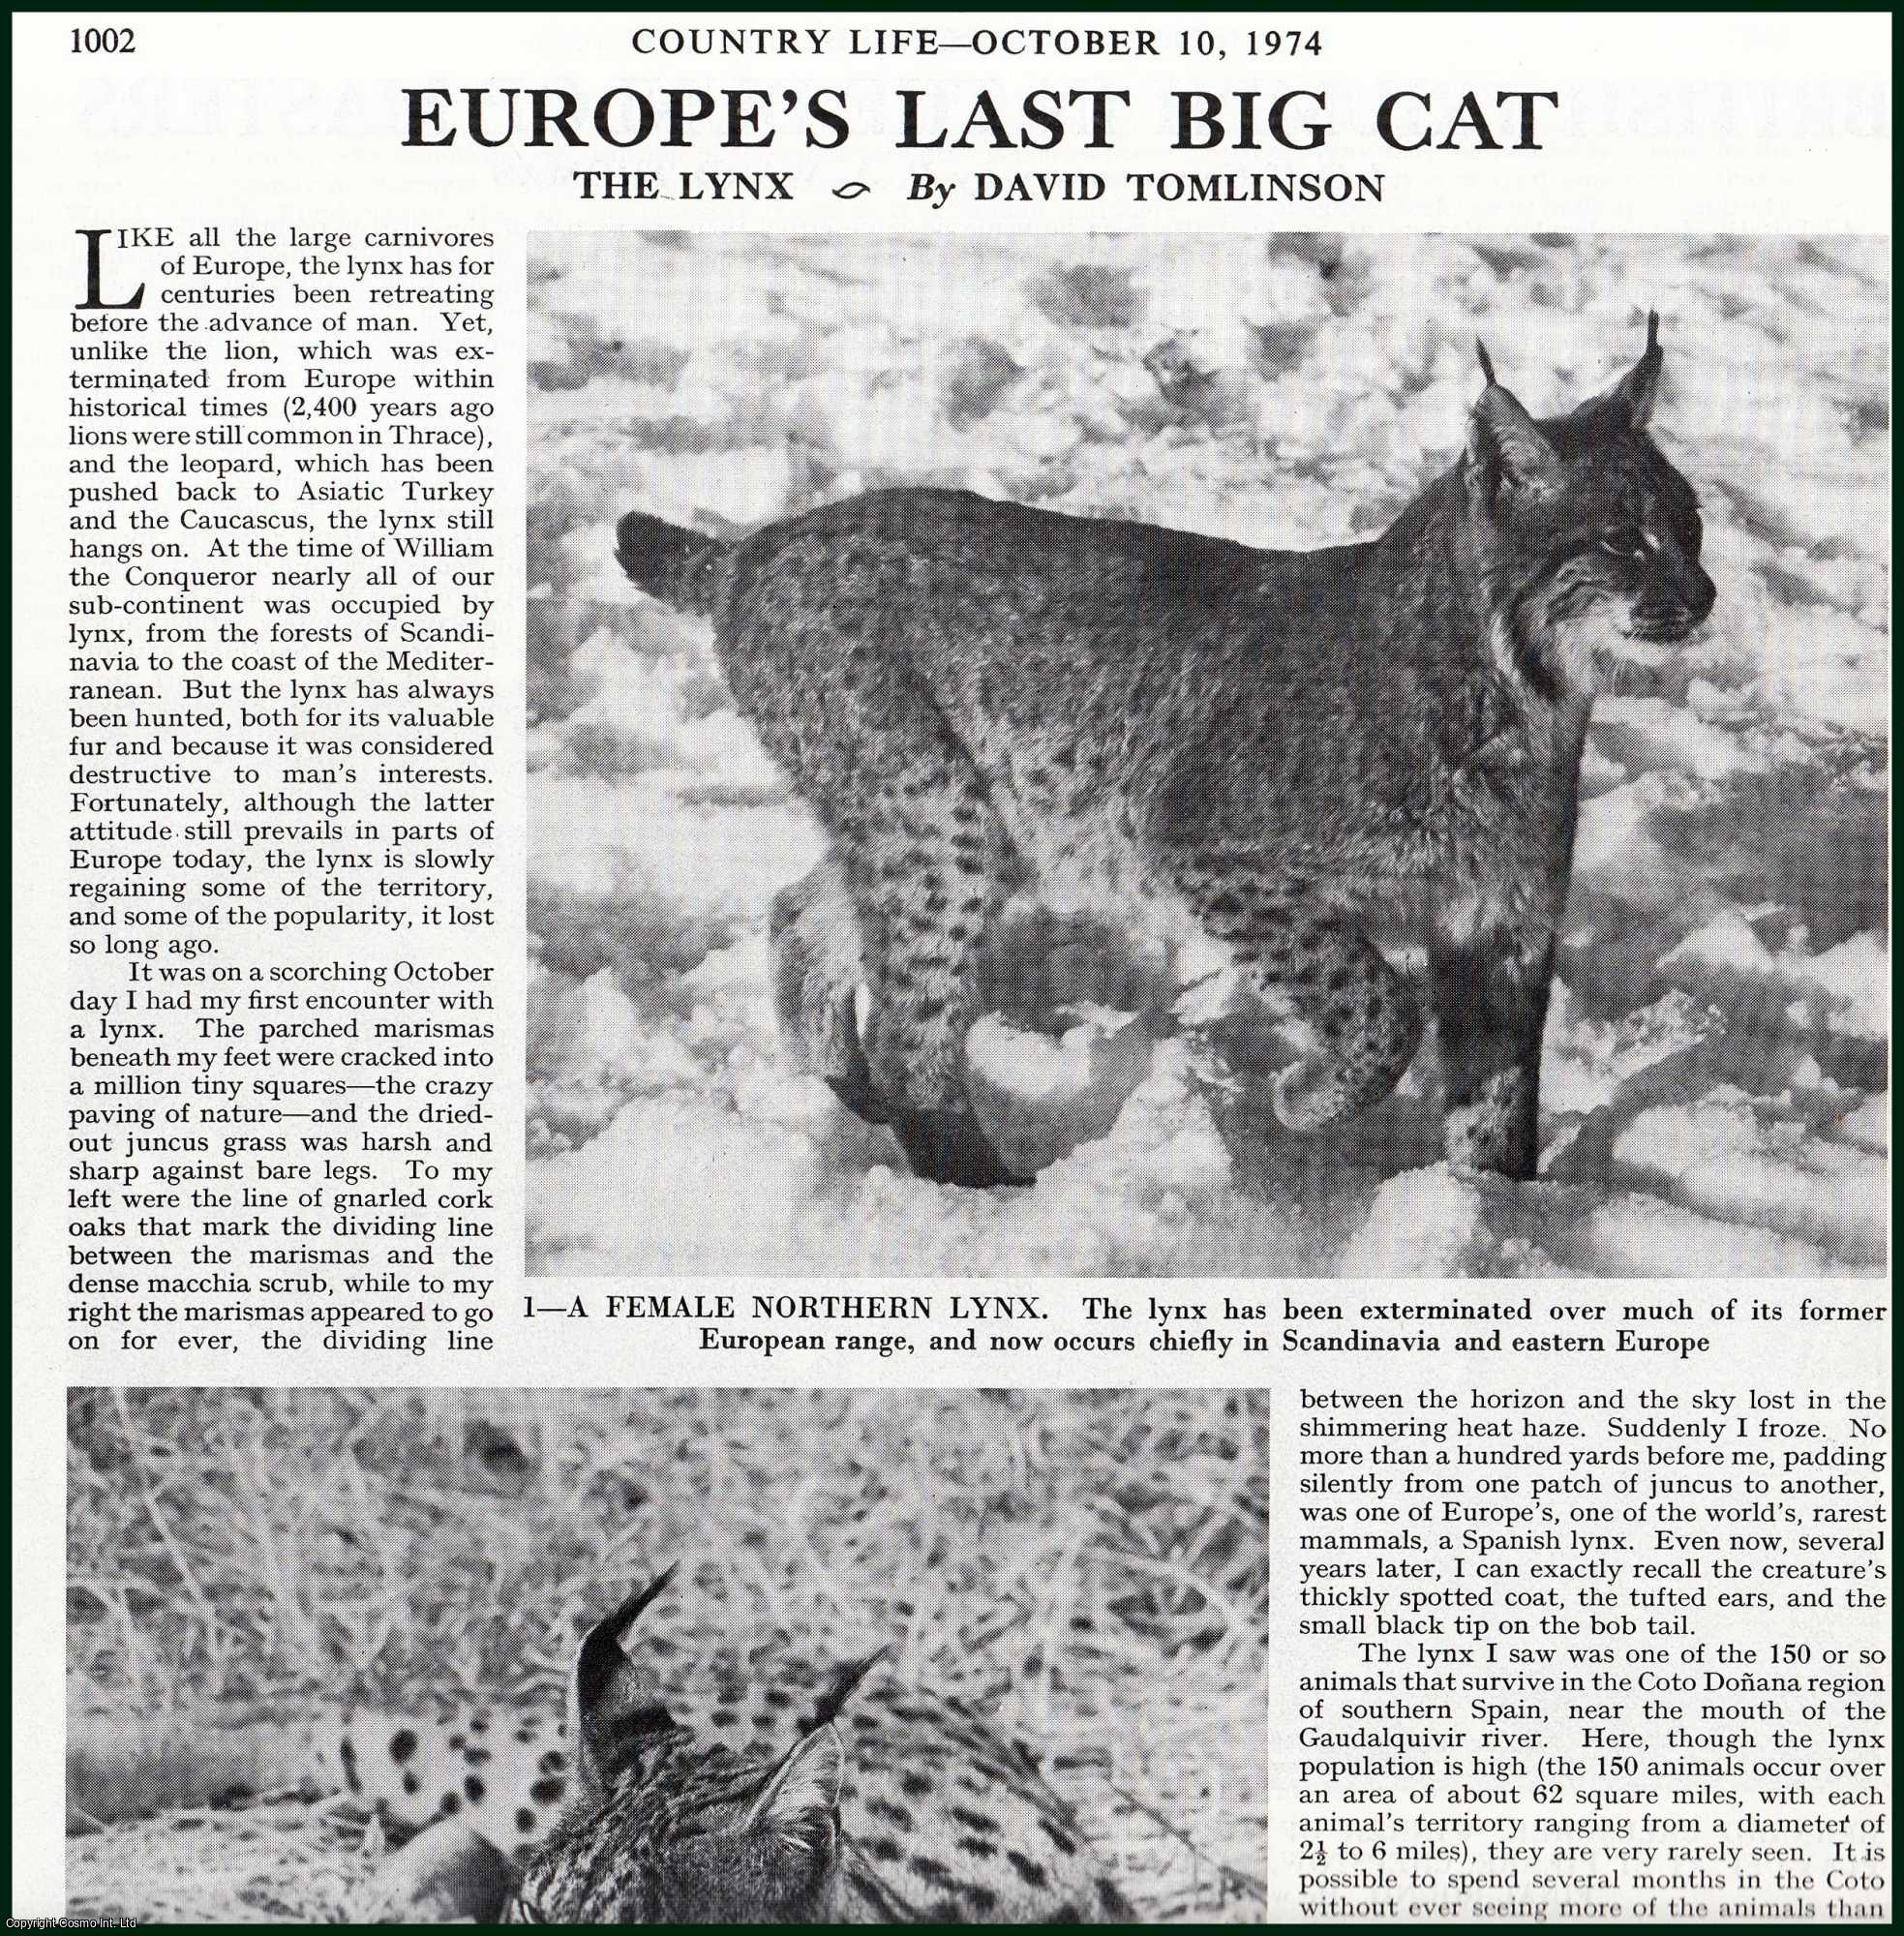 Country Life Magazine - The Lynx : Europe's Last Big Cat. Several pictures and accompanying text, removed from an original issue of Country Life Magazine, 1974.